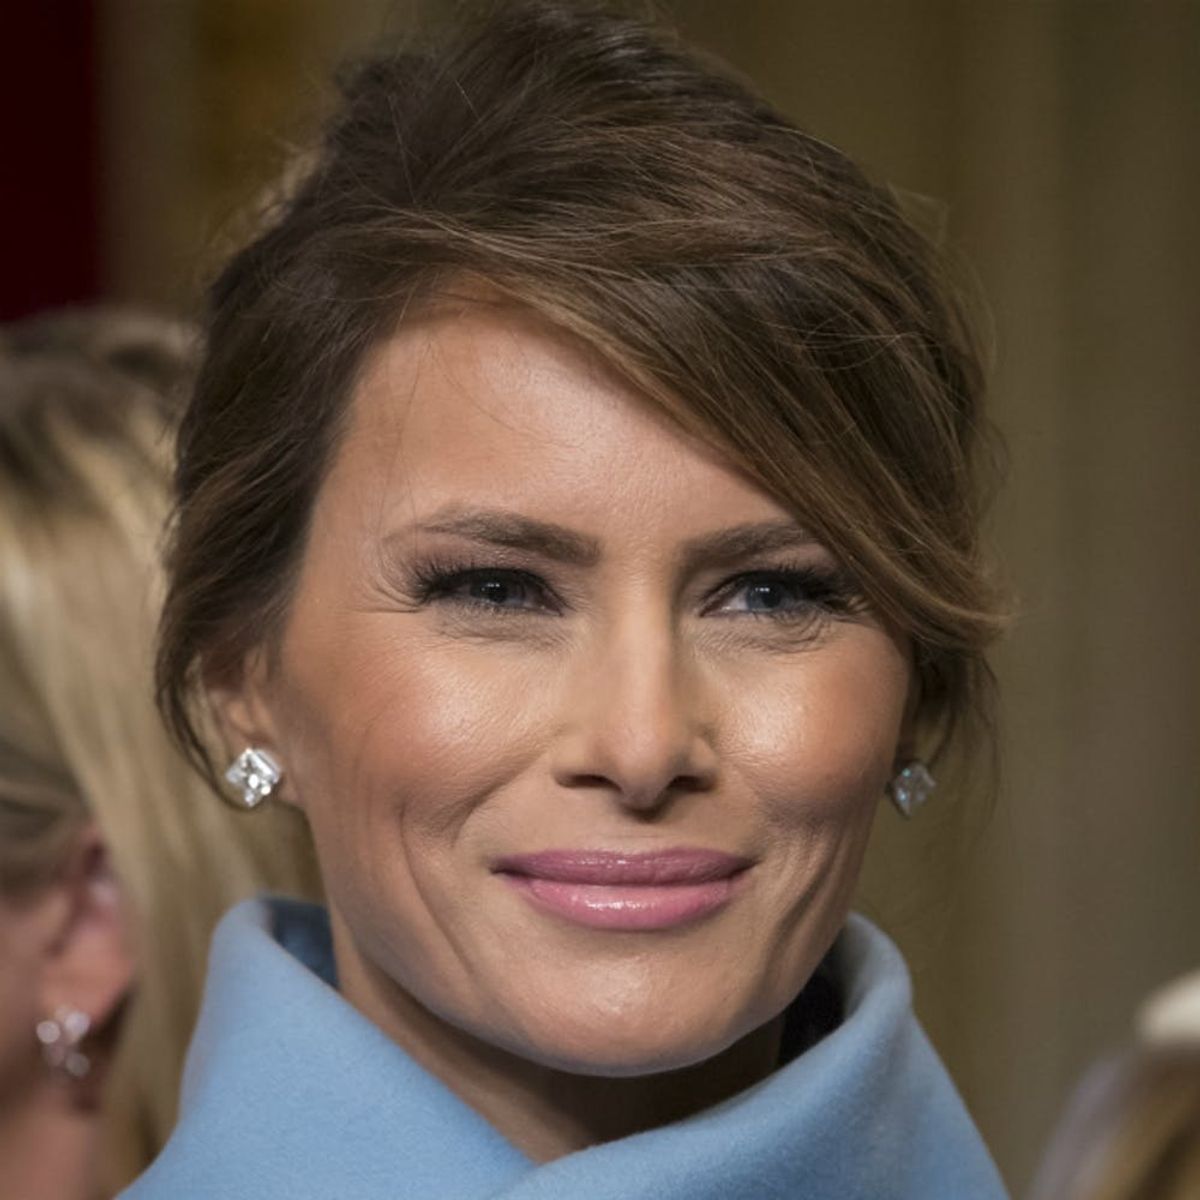 Melania Trump’s Lawsuit Reveals She Wants to Use the White House for Financial Gain